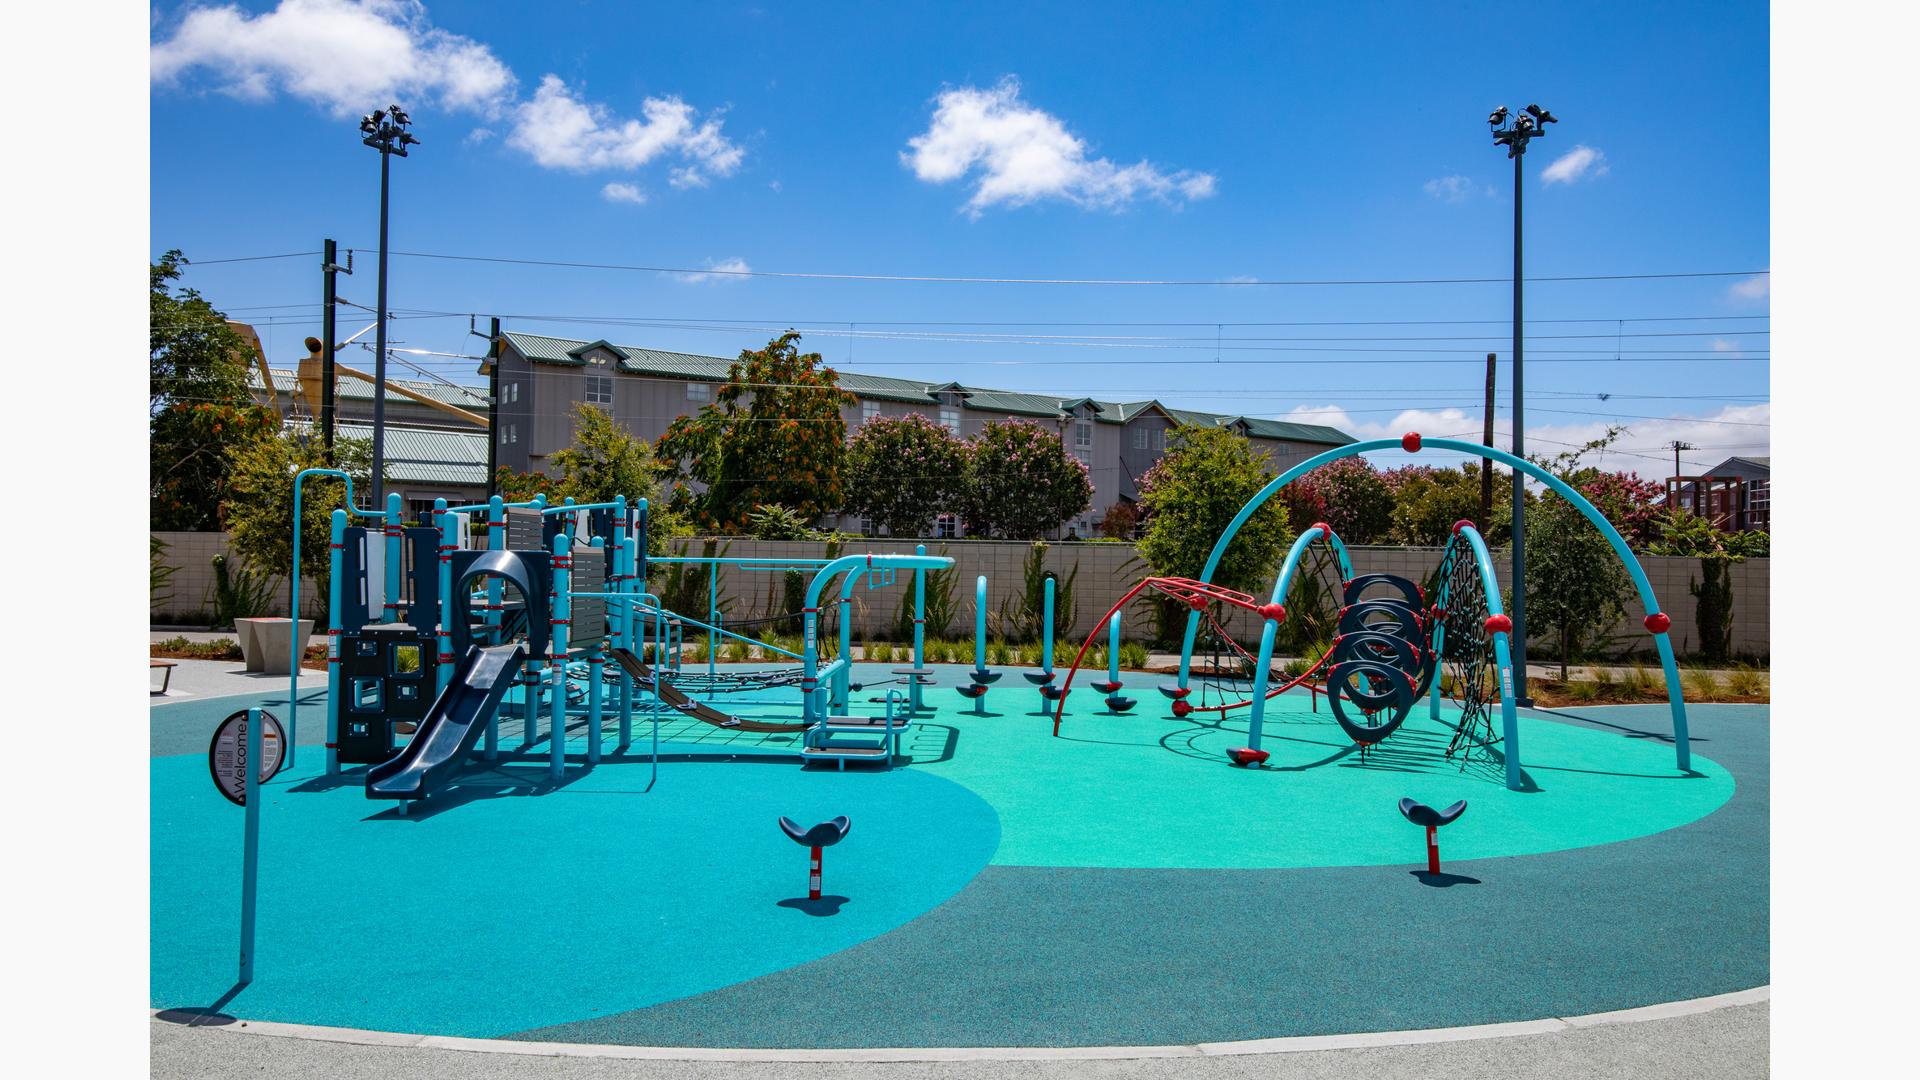 A multi activity play structure sits next to a large arched multi climber with two surrounding seat spinners all on safety surfacing colored varying shades of blue.